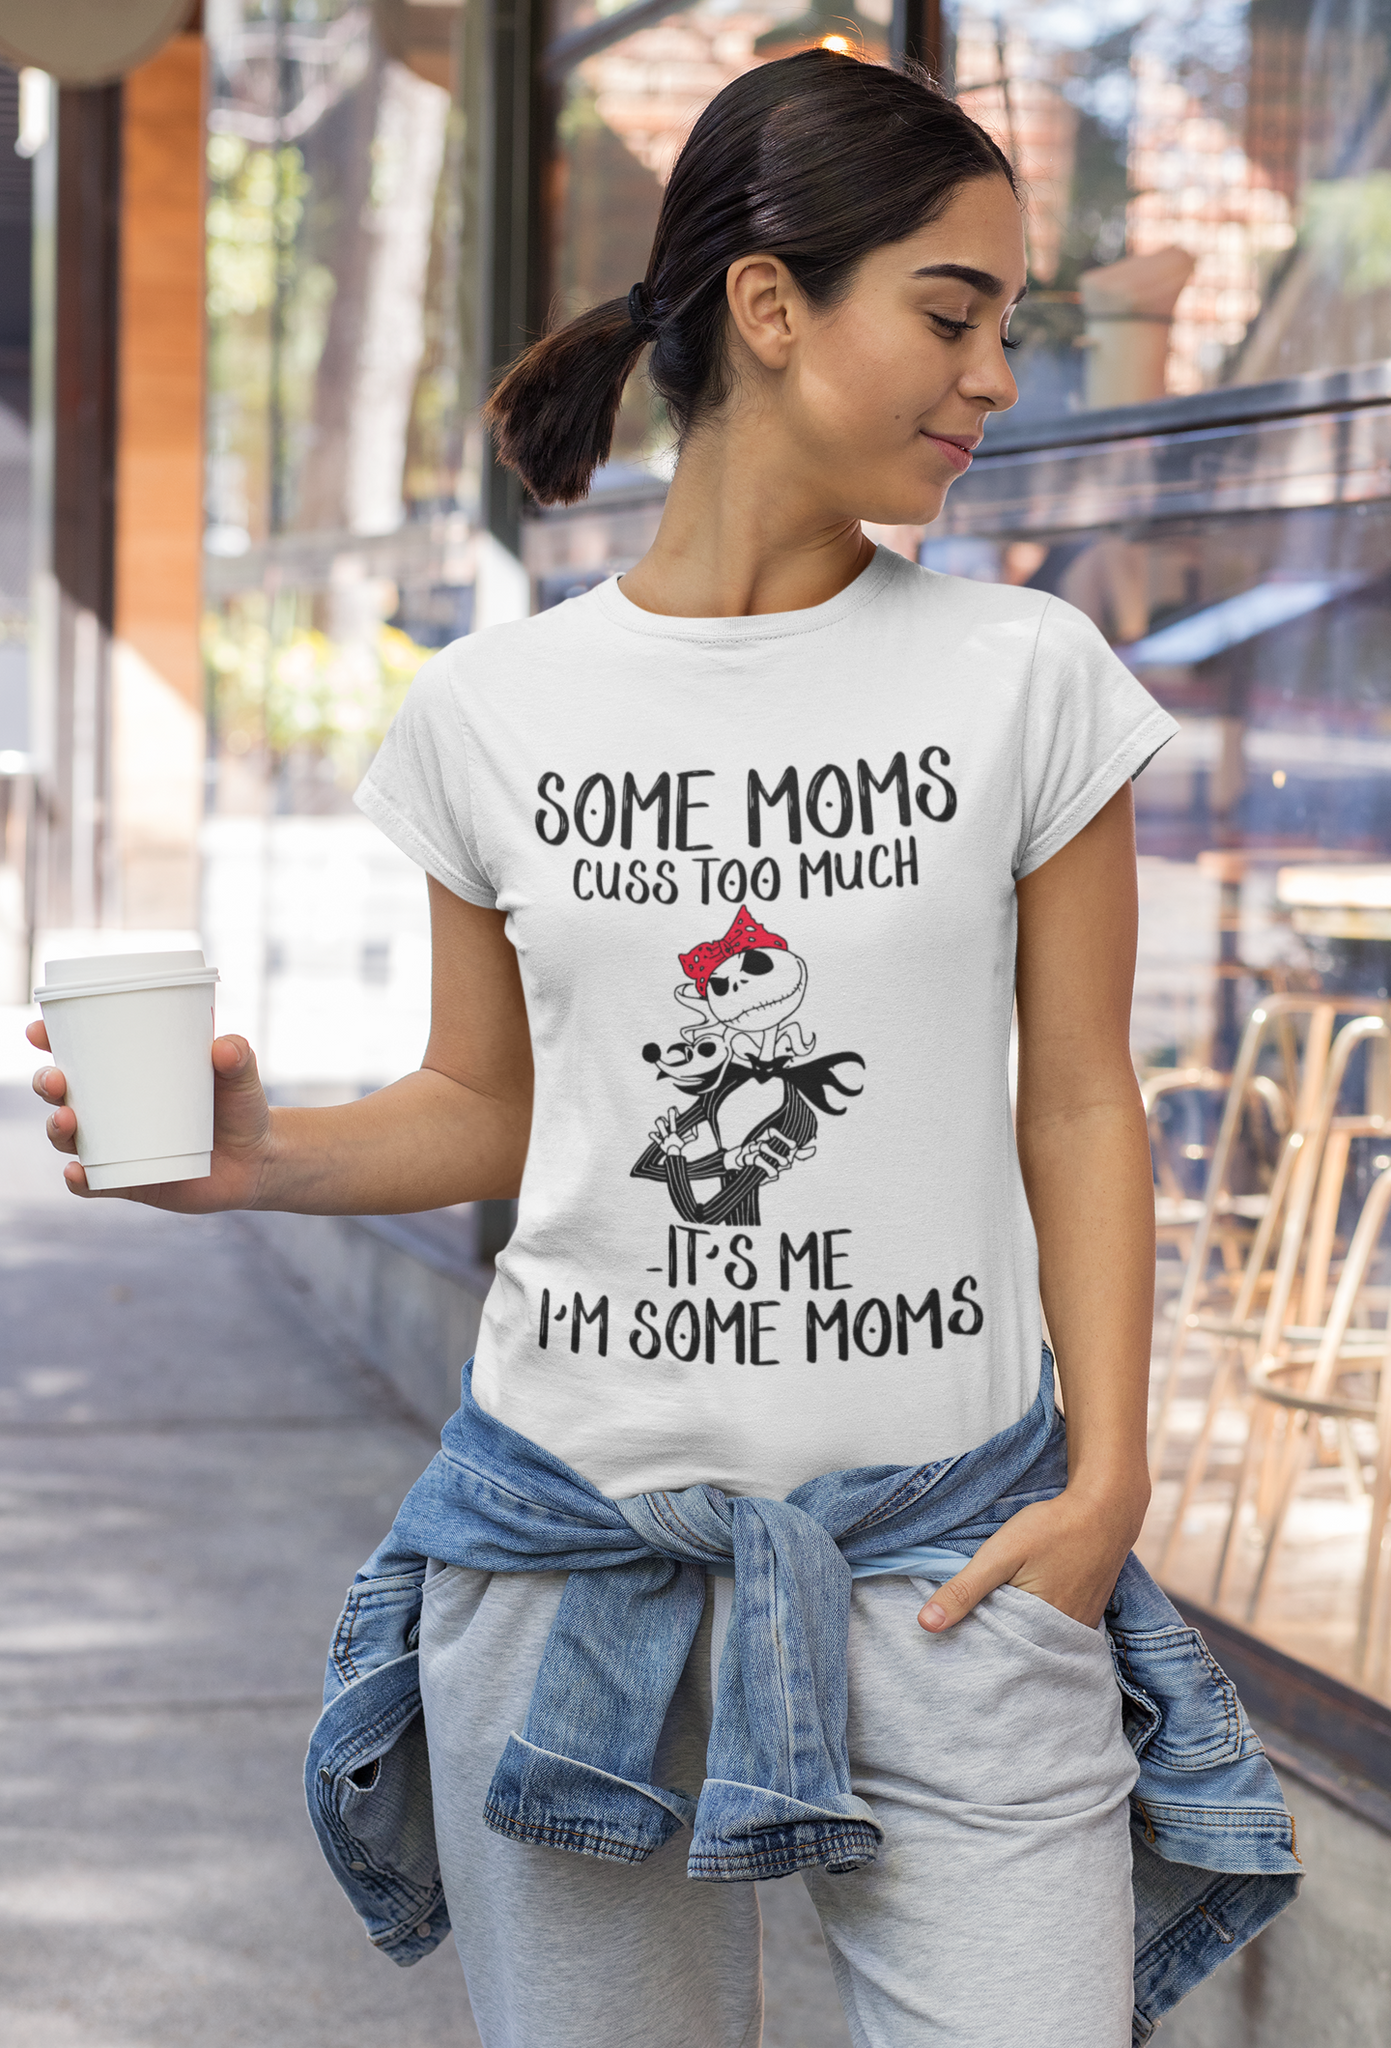 Nightmare Before Christmas T Shirt, Jack Skellington T Shirt, Some Moms Cuss Too Much Tshirt, Mothers Day Gifts